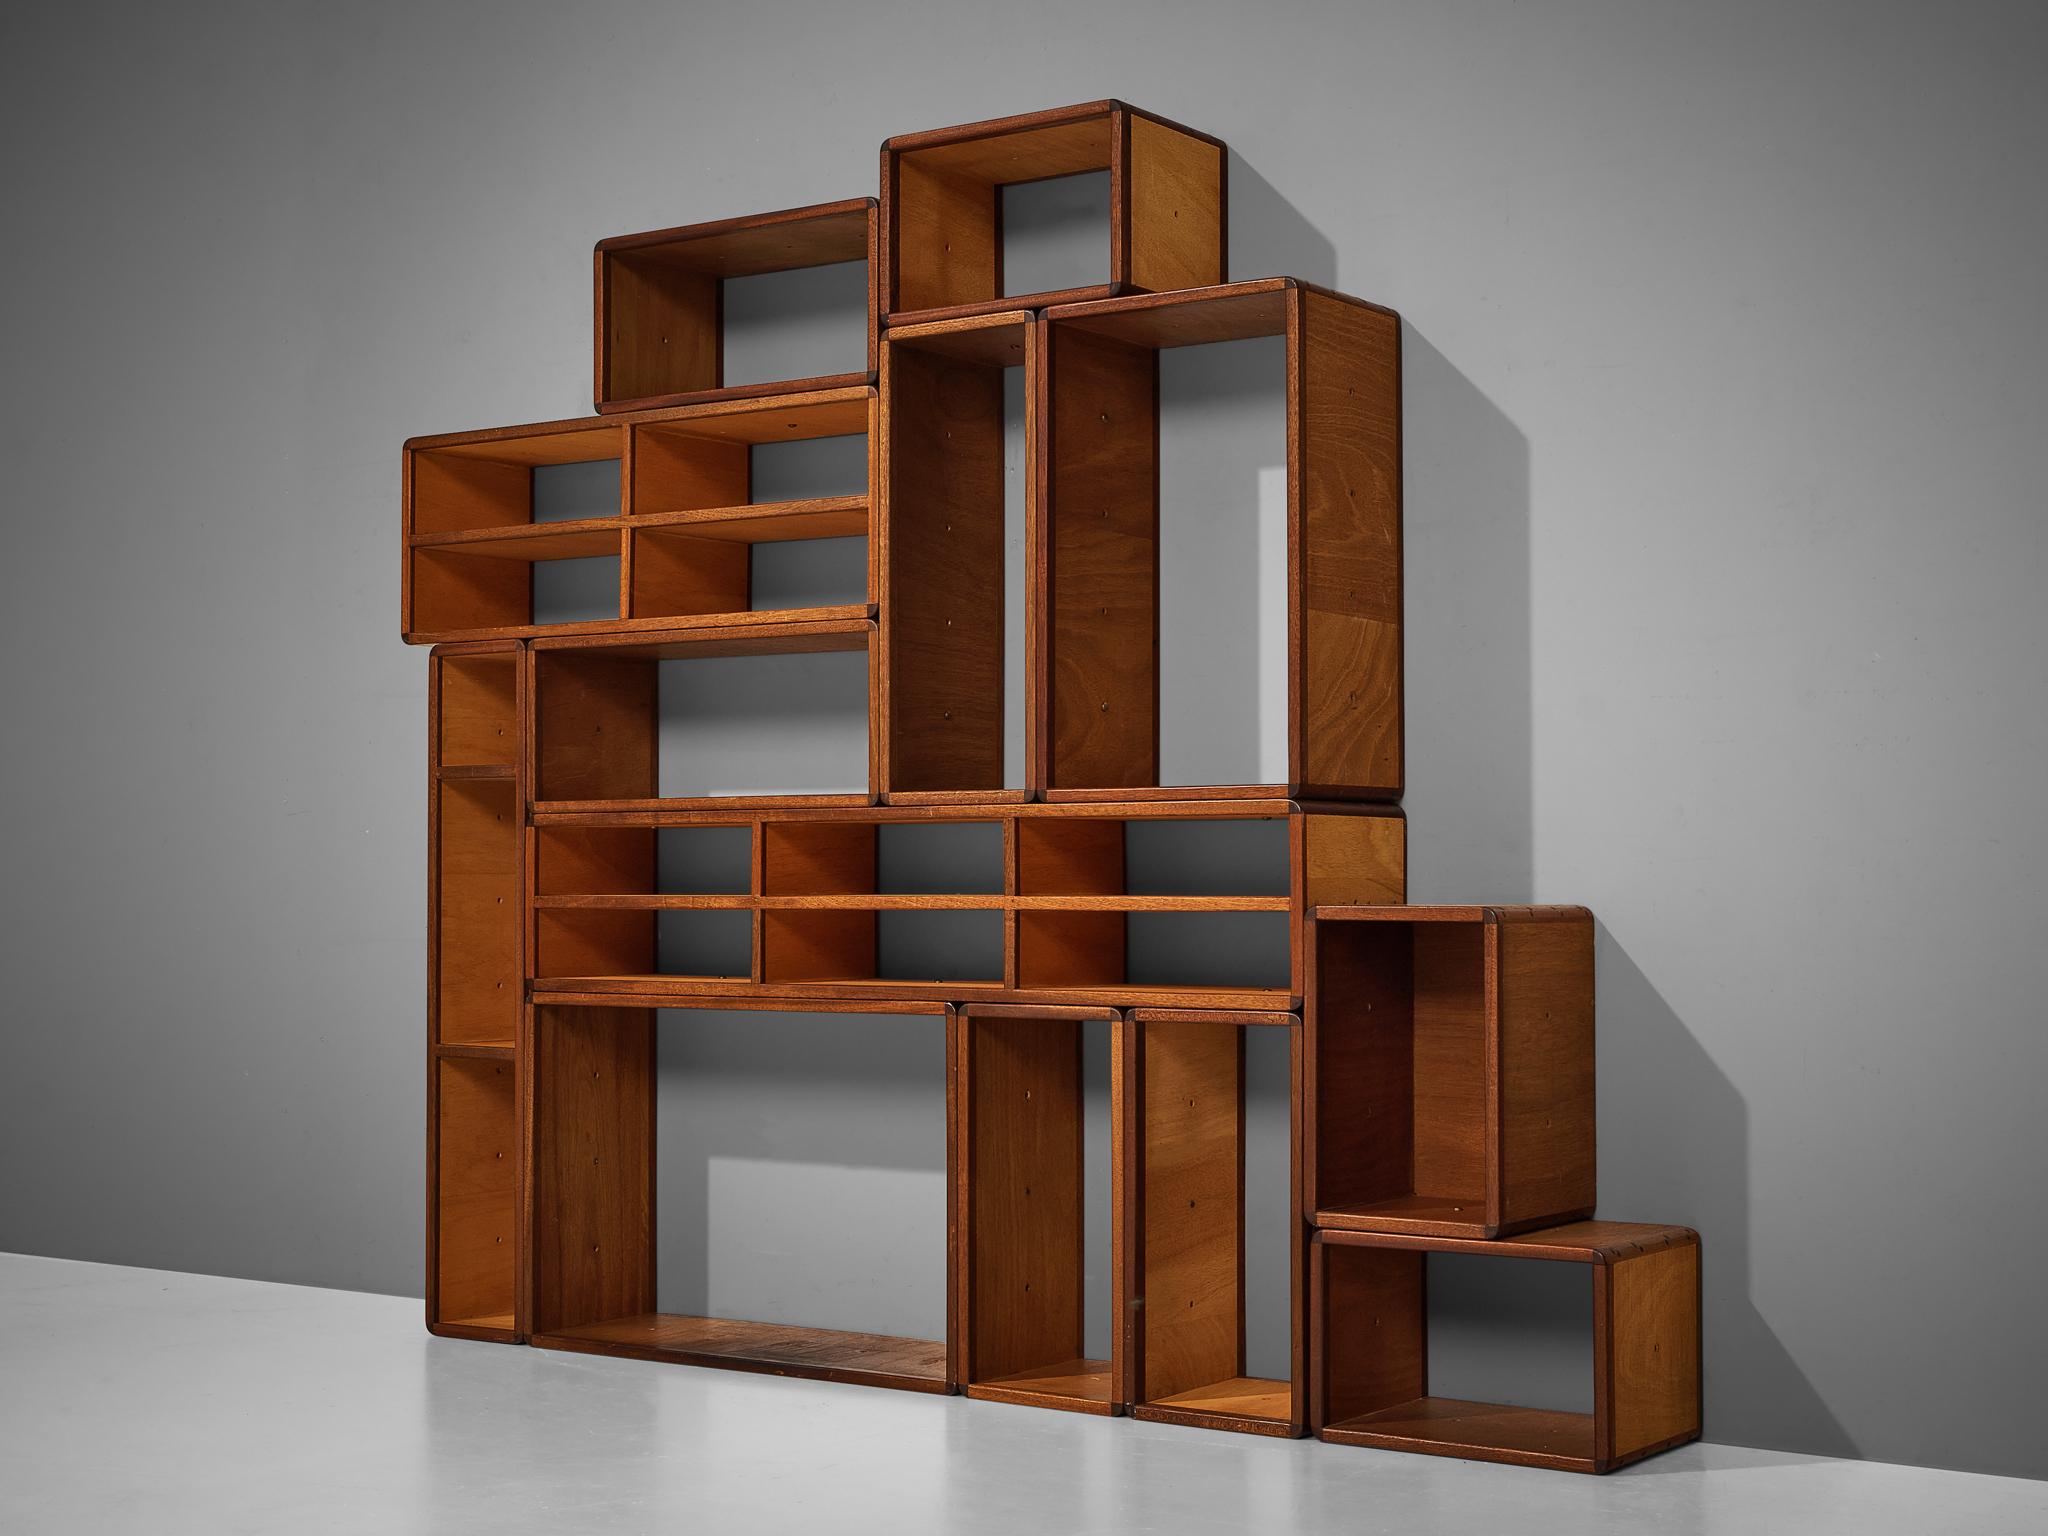 Modular wall unit, teak, mahogany, brass, Germany, 1970s

Adjustable, open wall unit in teak and mahogany. Due to the number of elements, this piece has endless possibilities to arrange them. The cubic components can be used as one large showcase